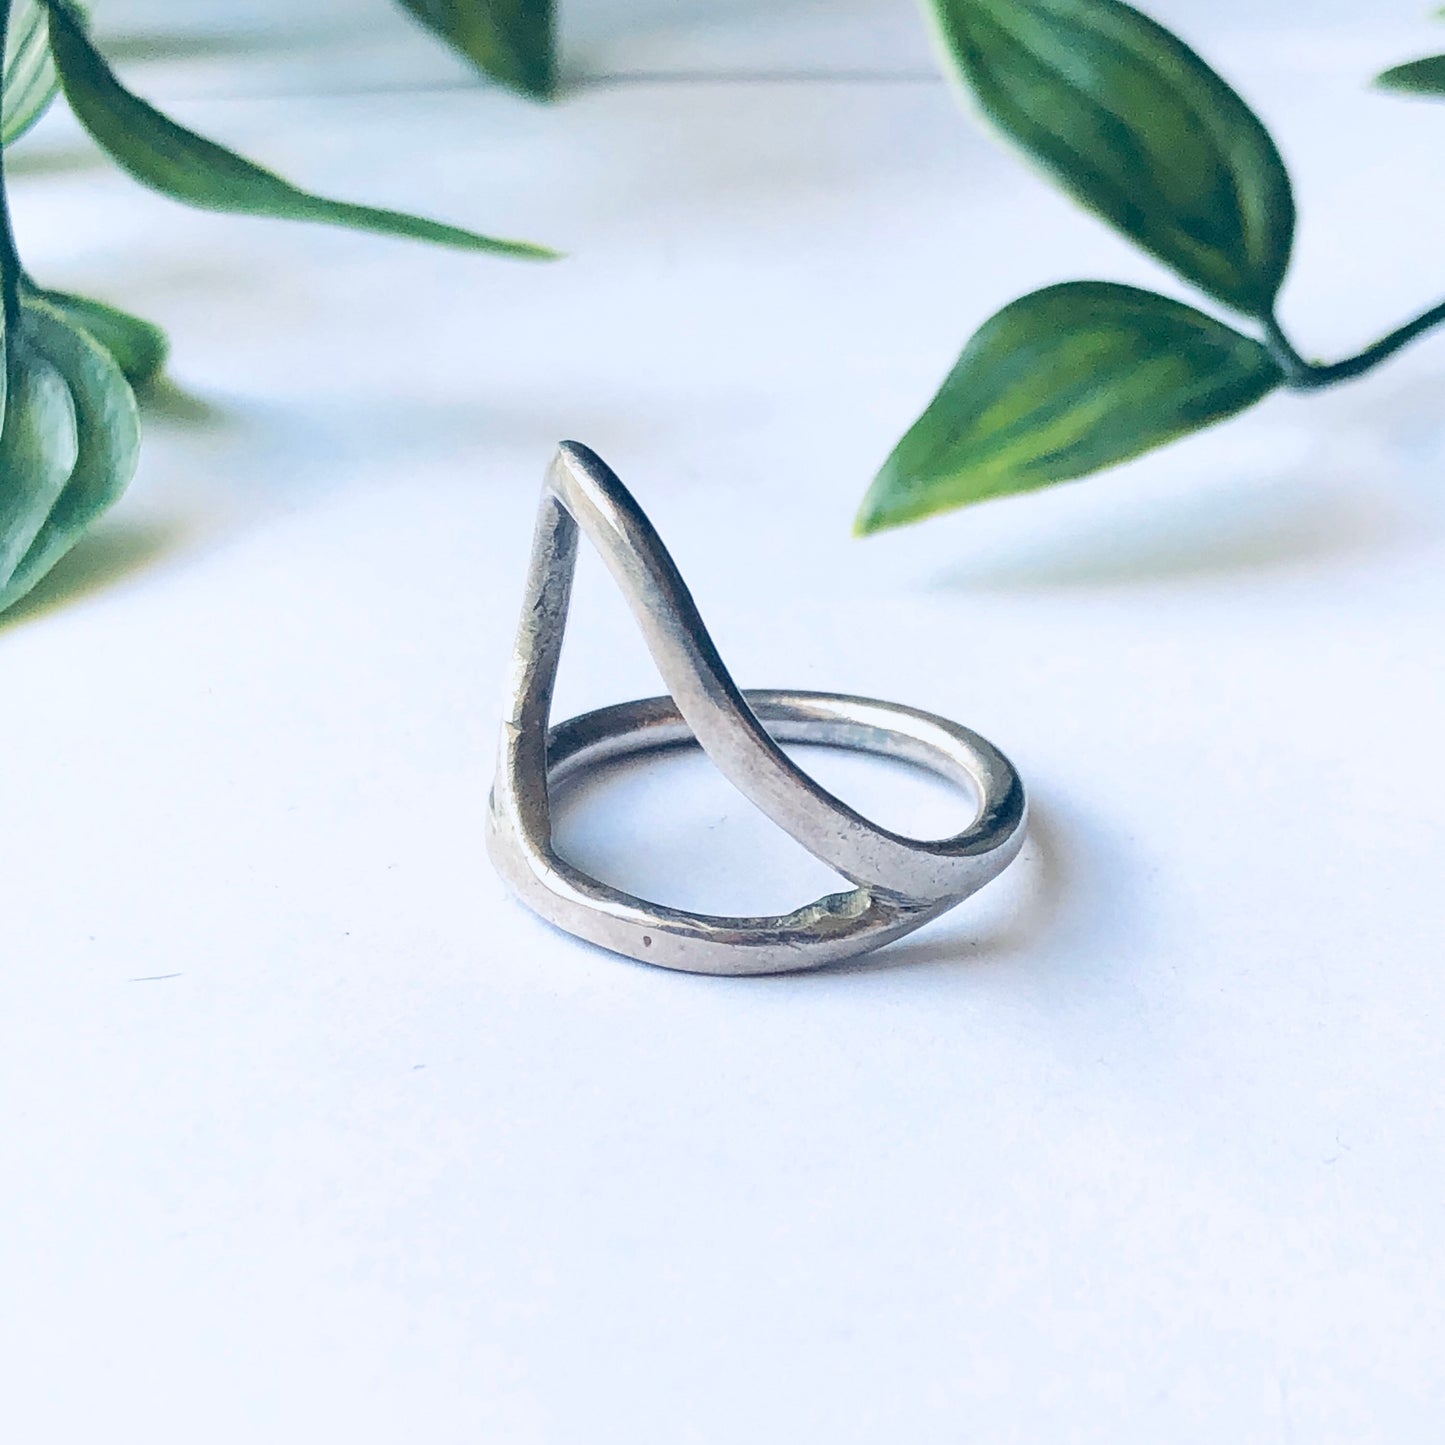 Vintage silver cut out ring with minimalist style and abstract design displayed against a white background with green leaves.